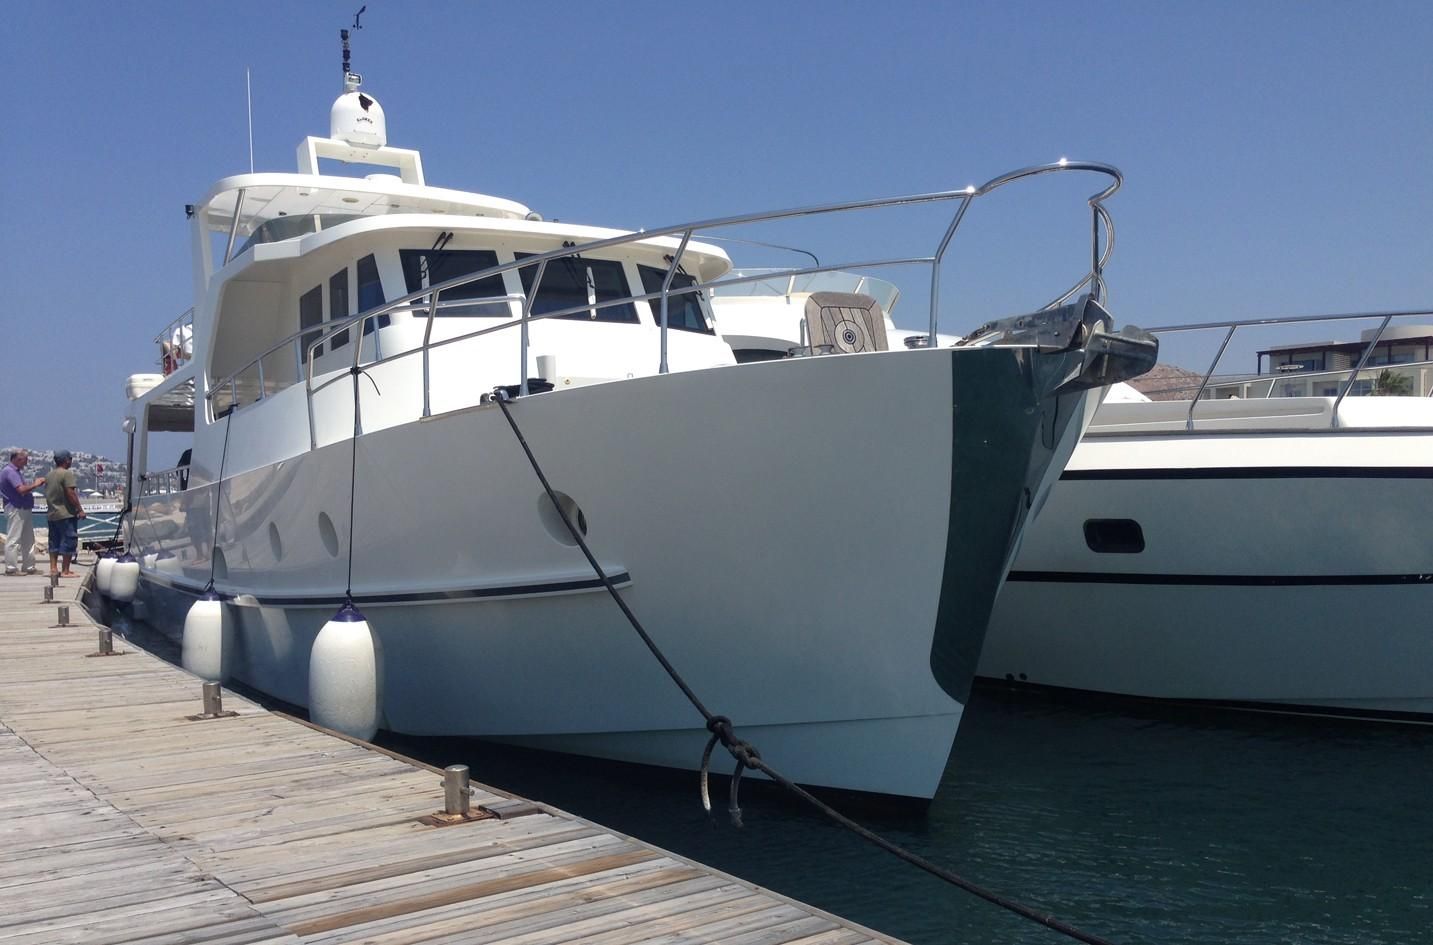 18 m yacht for sale